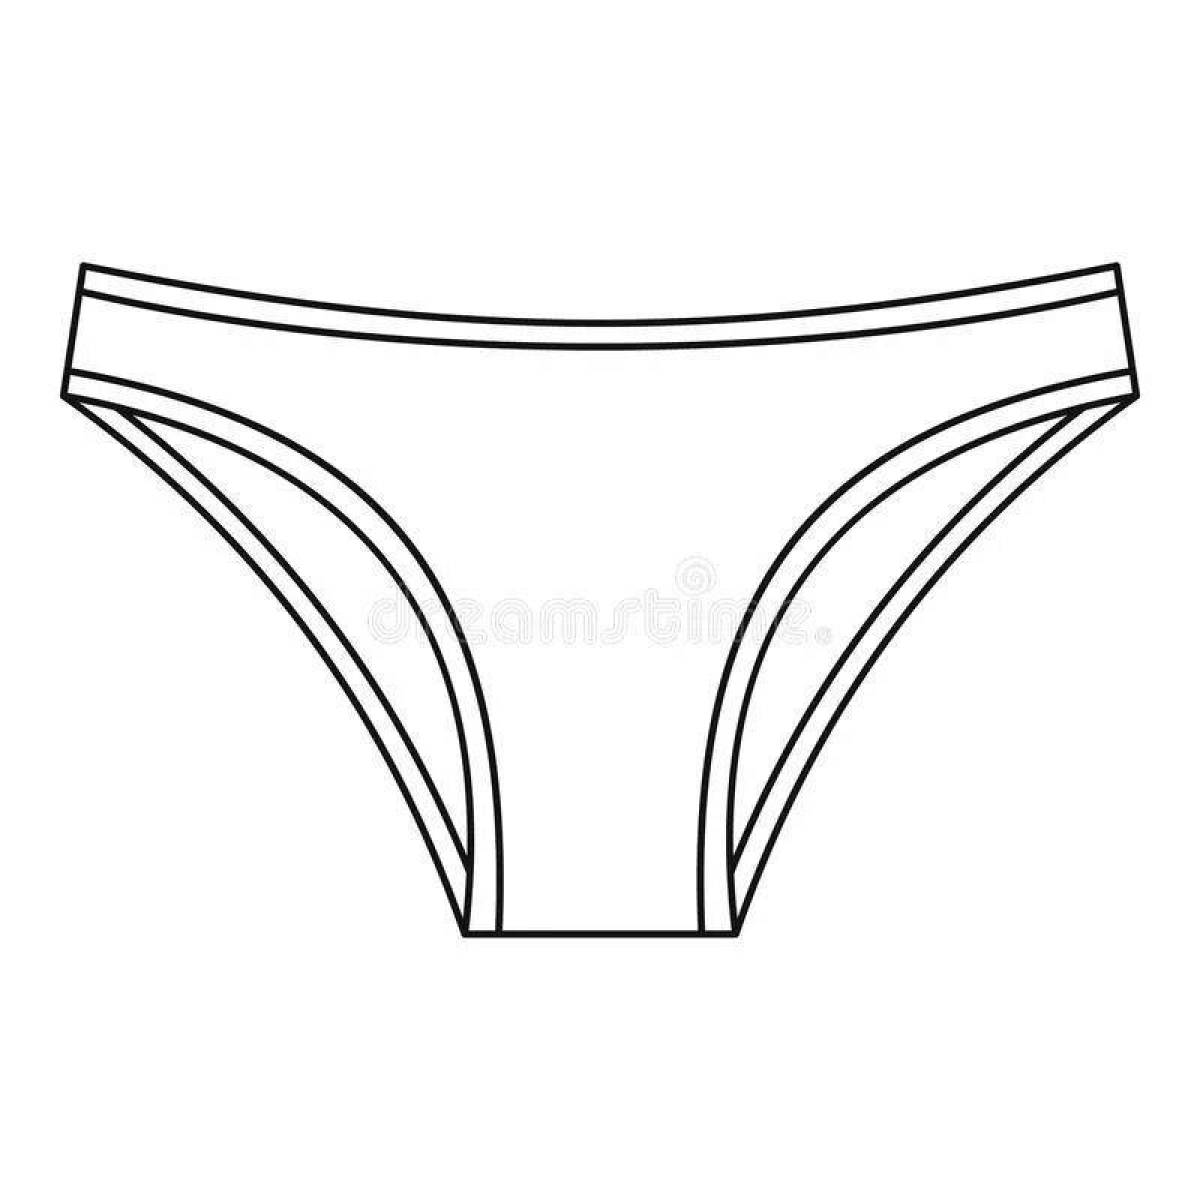 Coloring page adorable panties